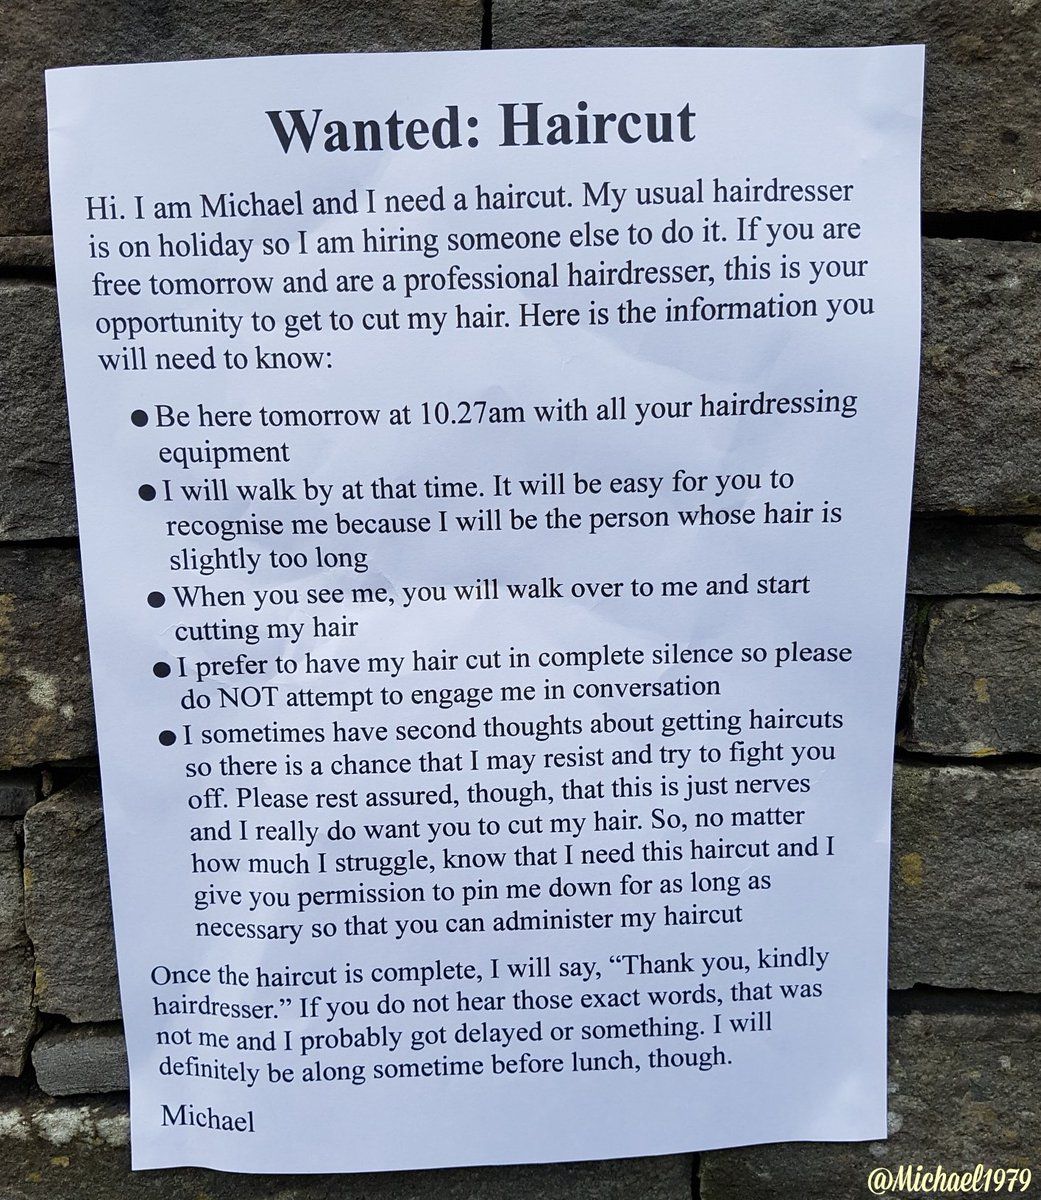 Any hairdressers in the area?